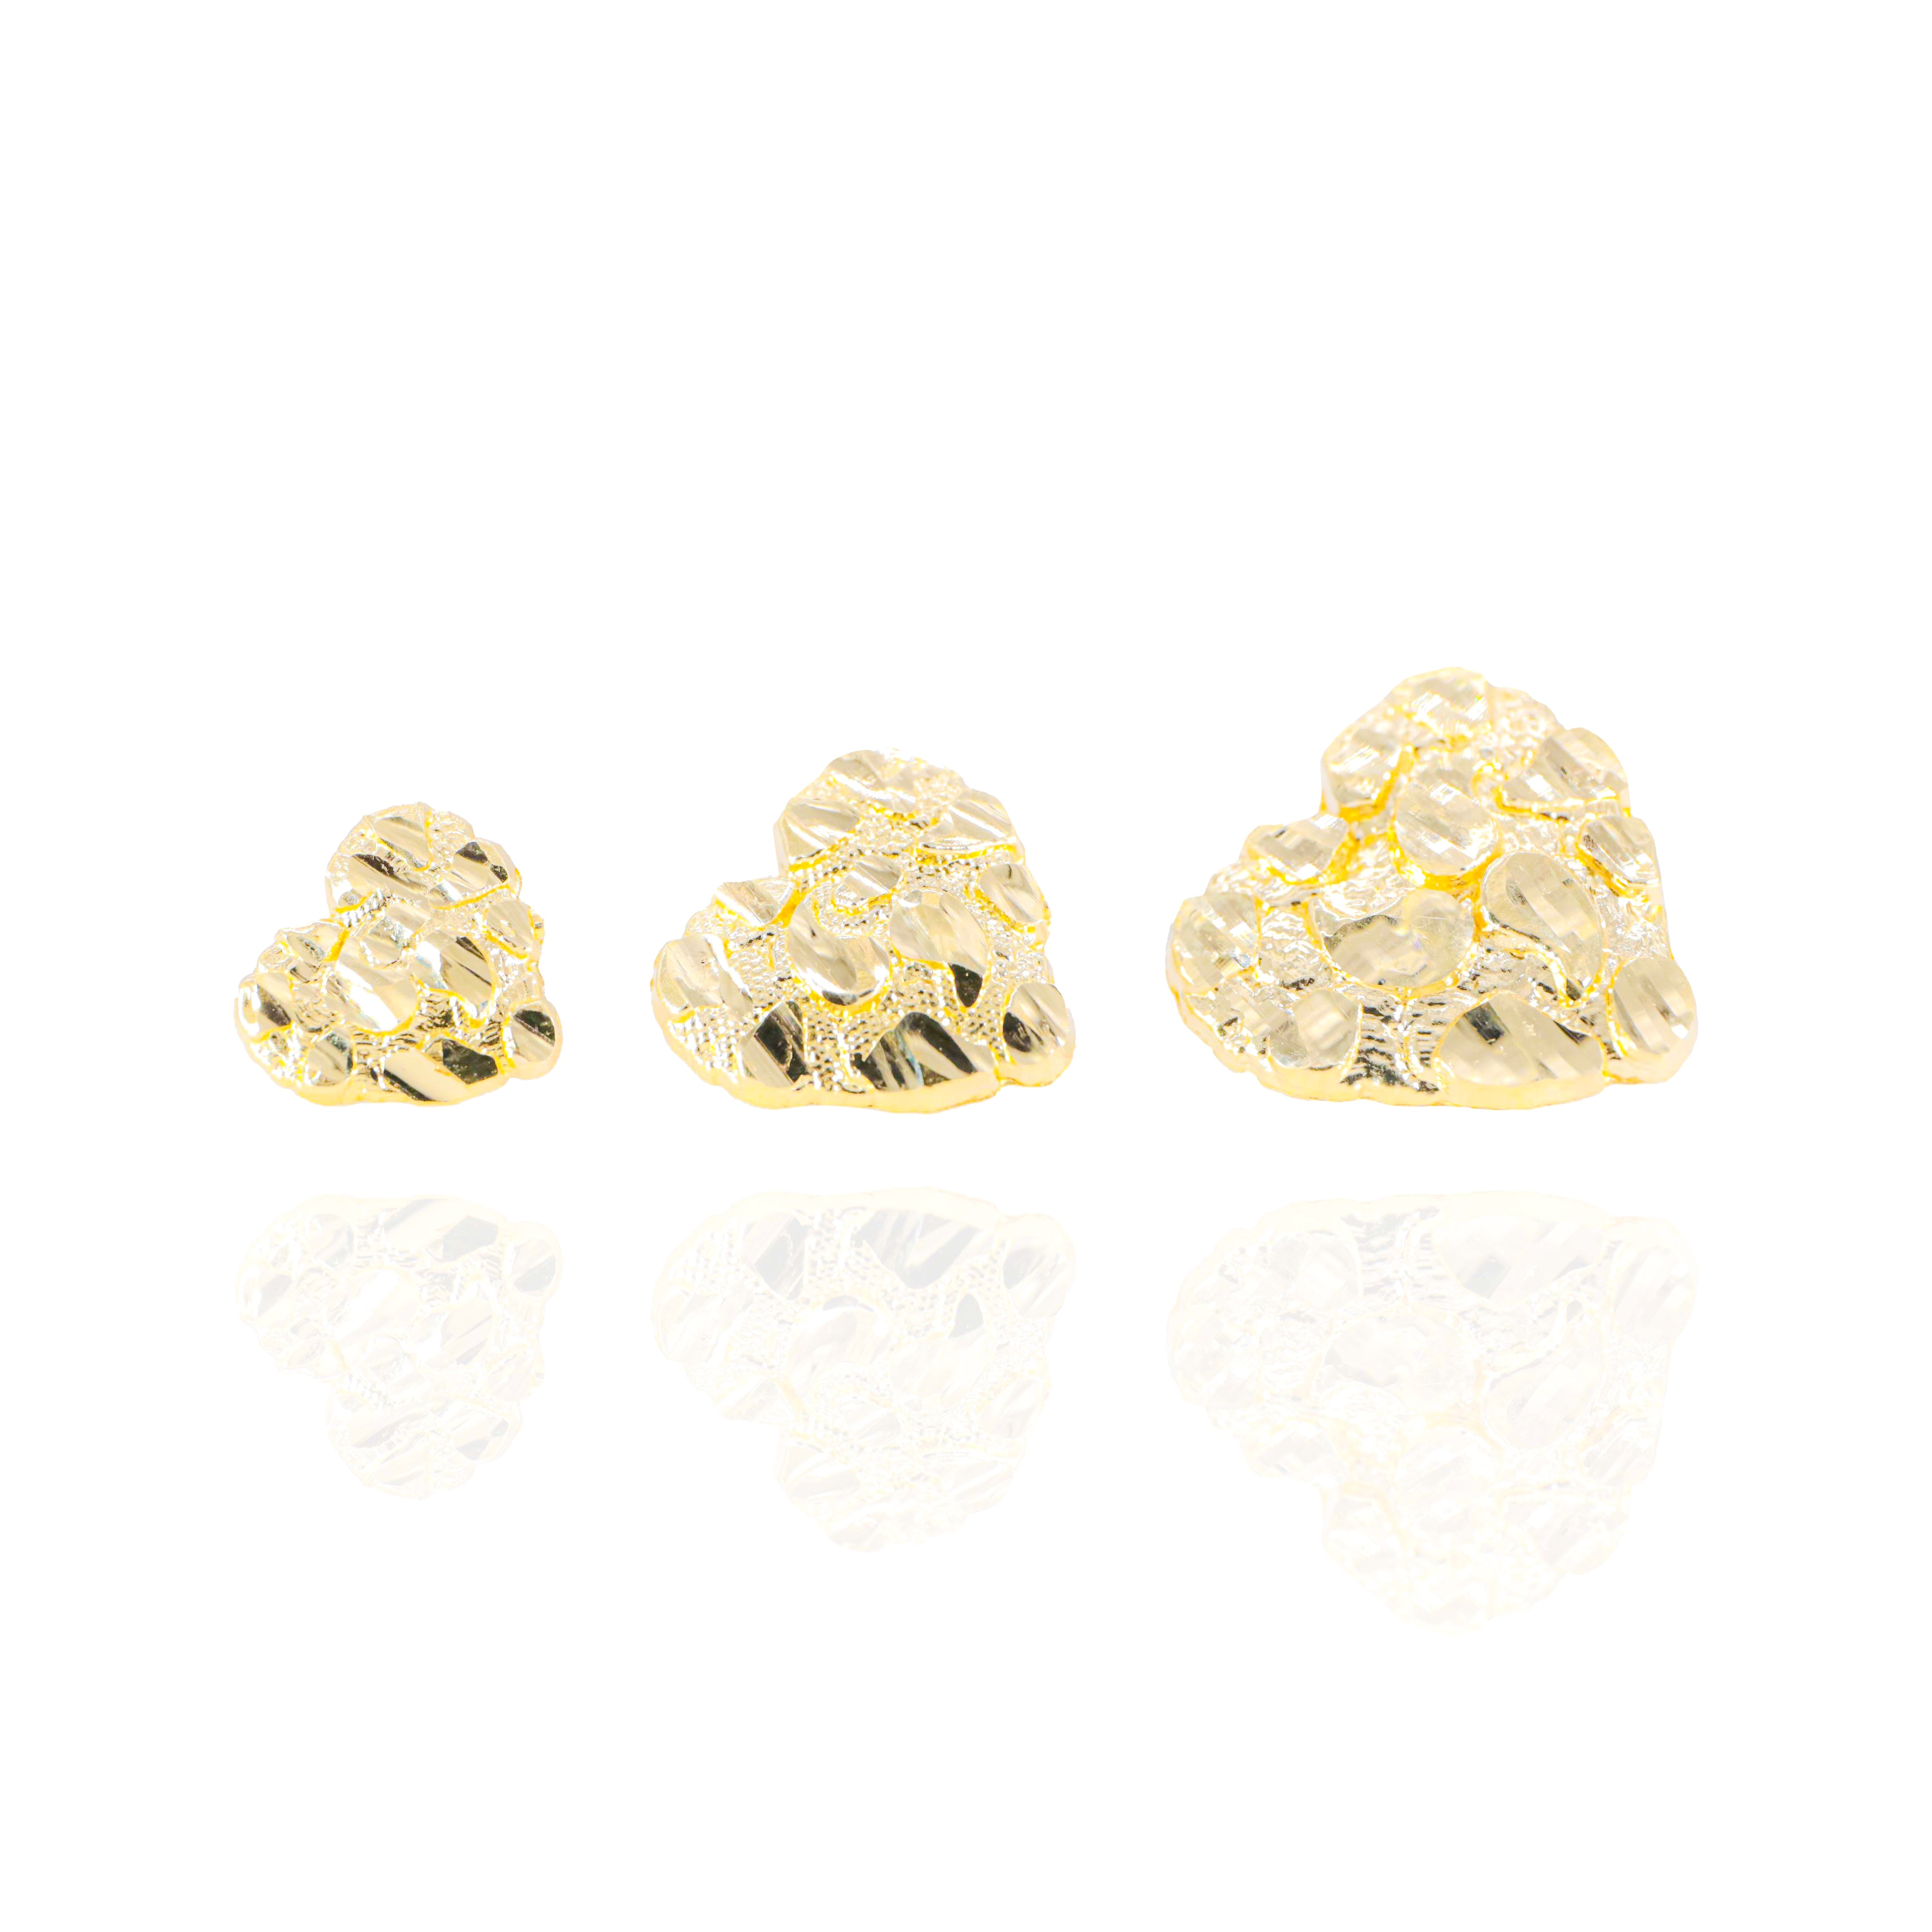 Solid Gold Nugget Heart Style Earrings